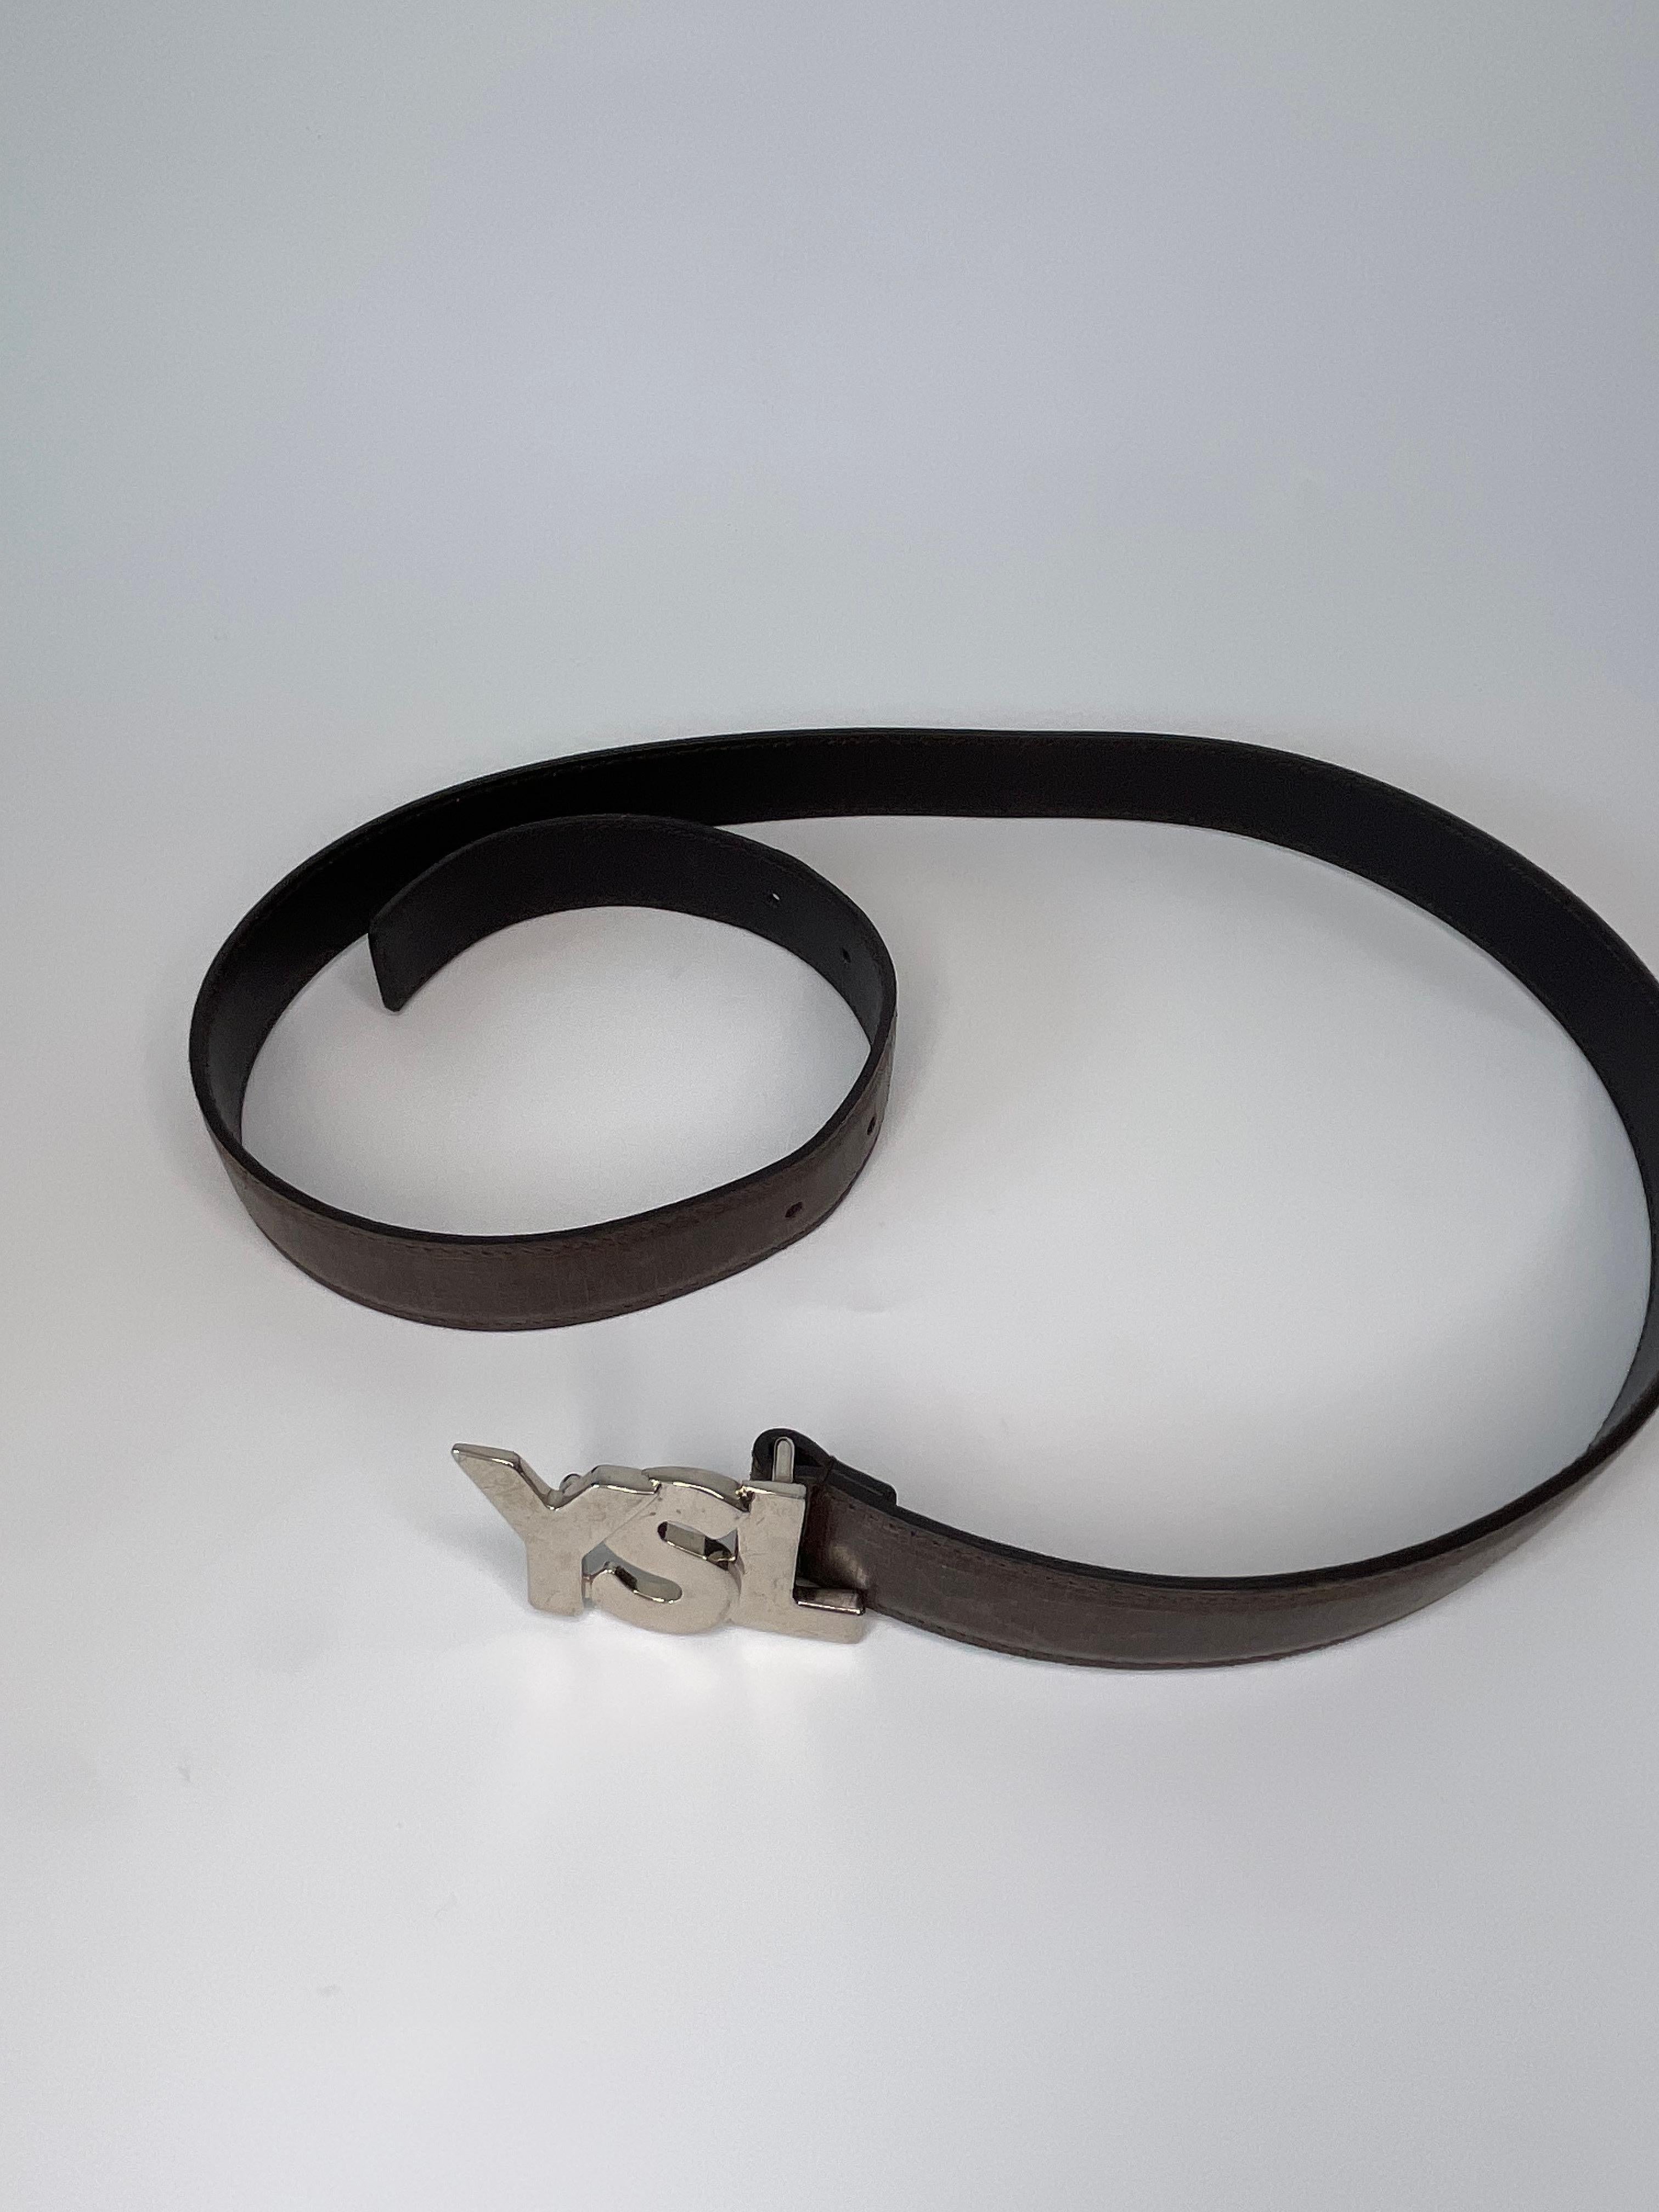 YSL brown leather belt with with silver-tone hardware. YSL logo on the buckle, item in good condition. 

COLOR: Brown with silver buckle
MATERIAL: Leather
DATE CODE: 274610
SIZE: 85/34
EST. RETAIL: $700.00
COMES WITH: Dust bag, original